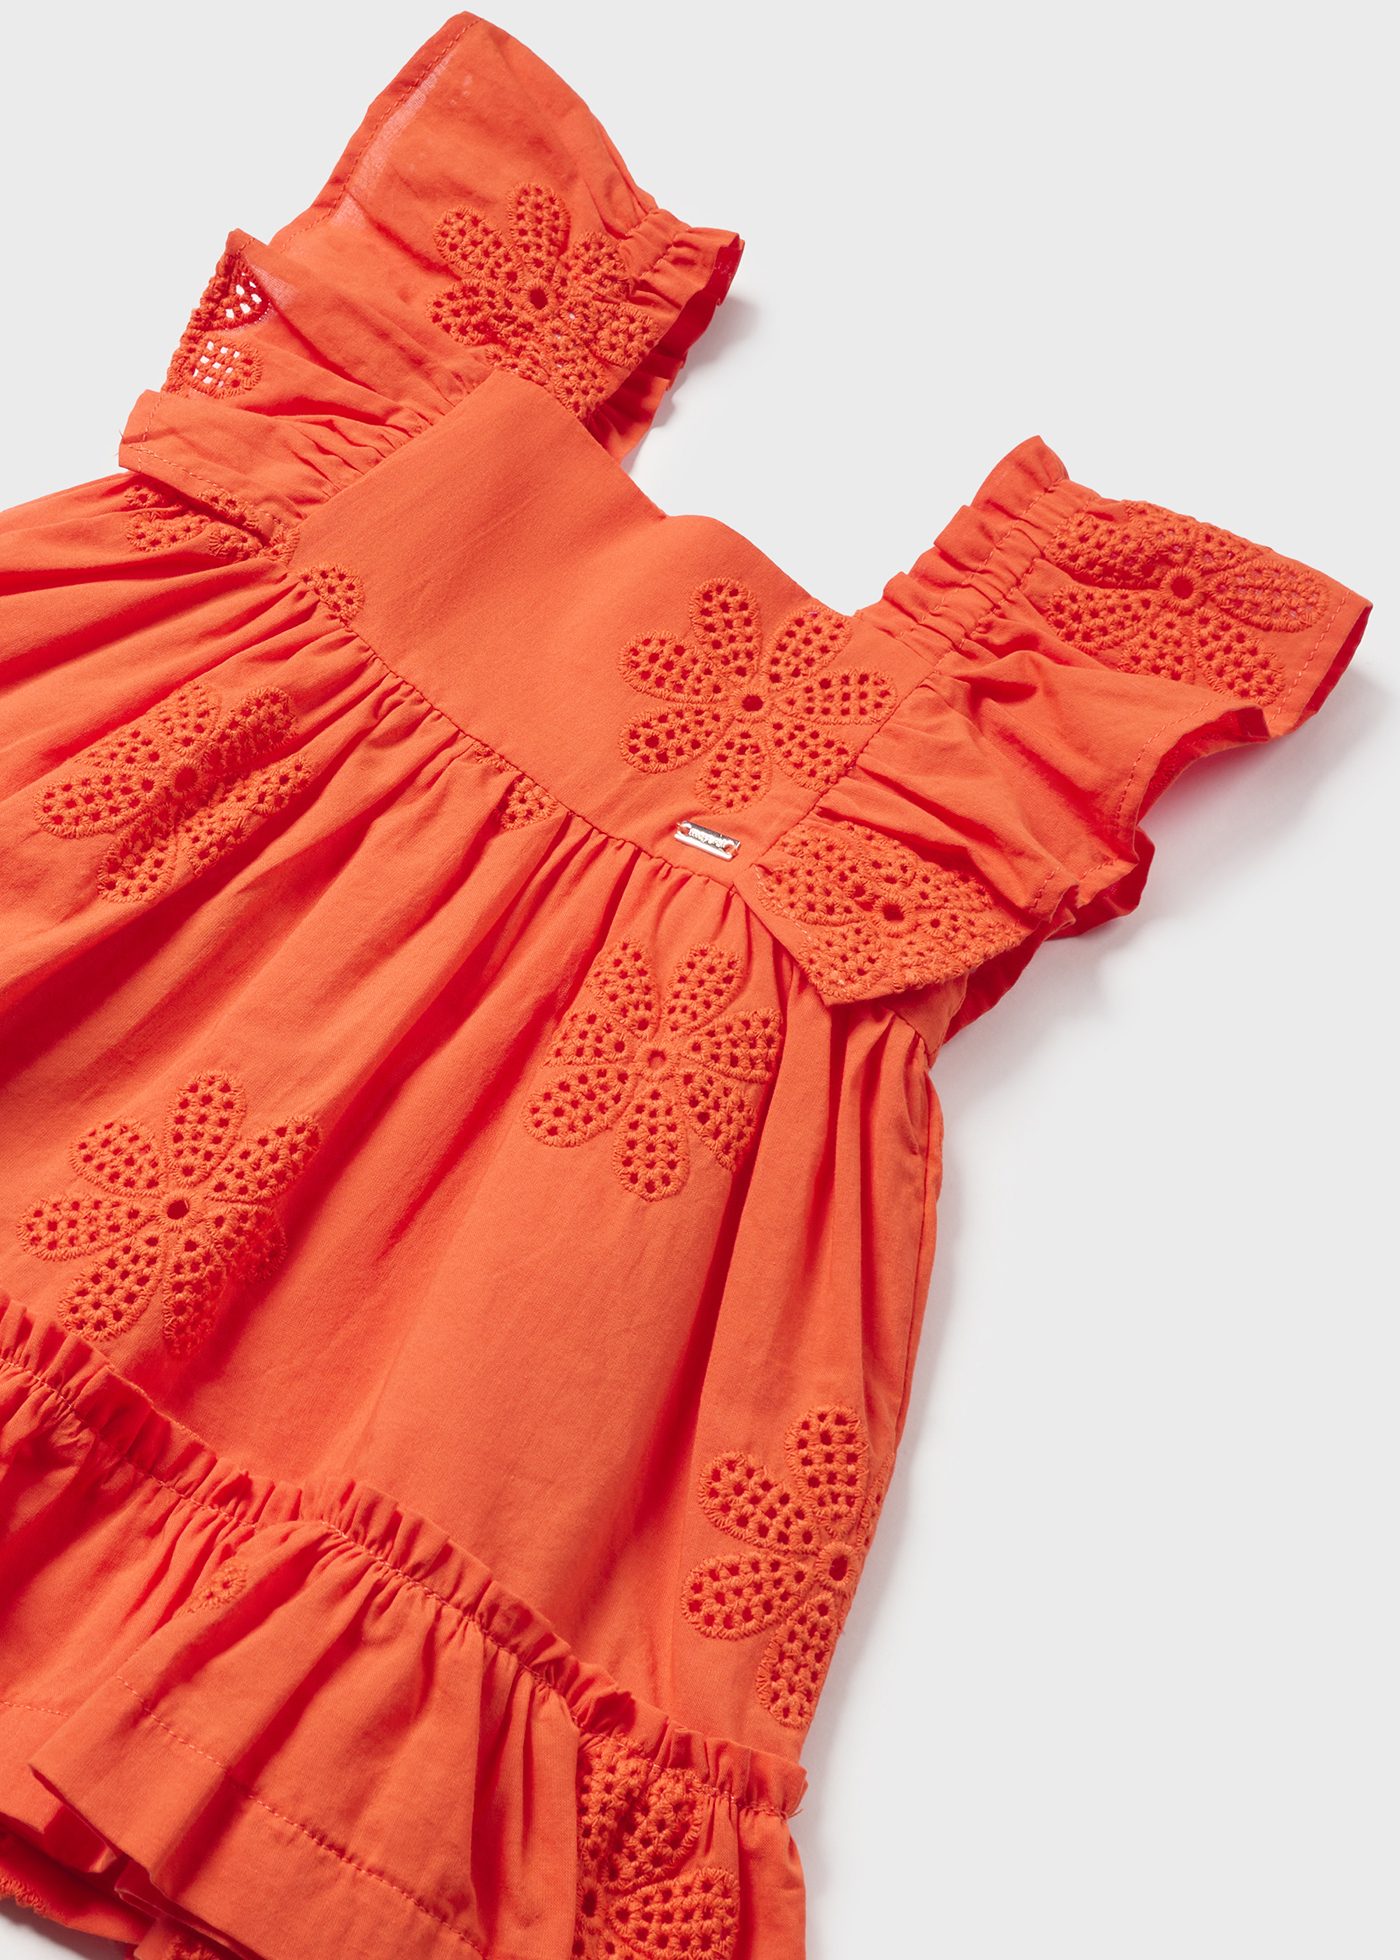 Baby Embroidered Ruffle Dress